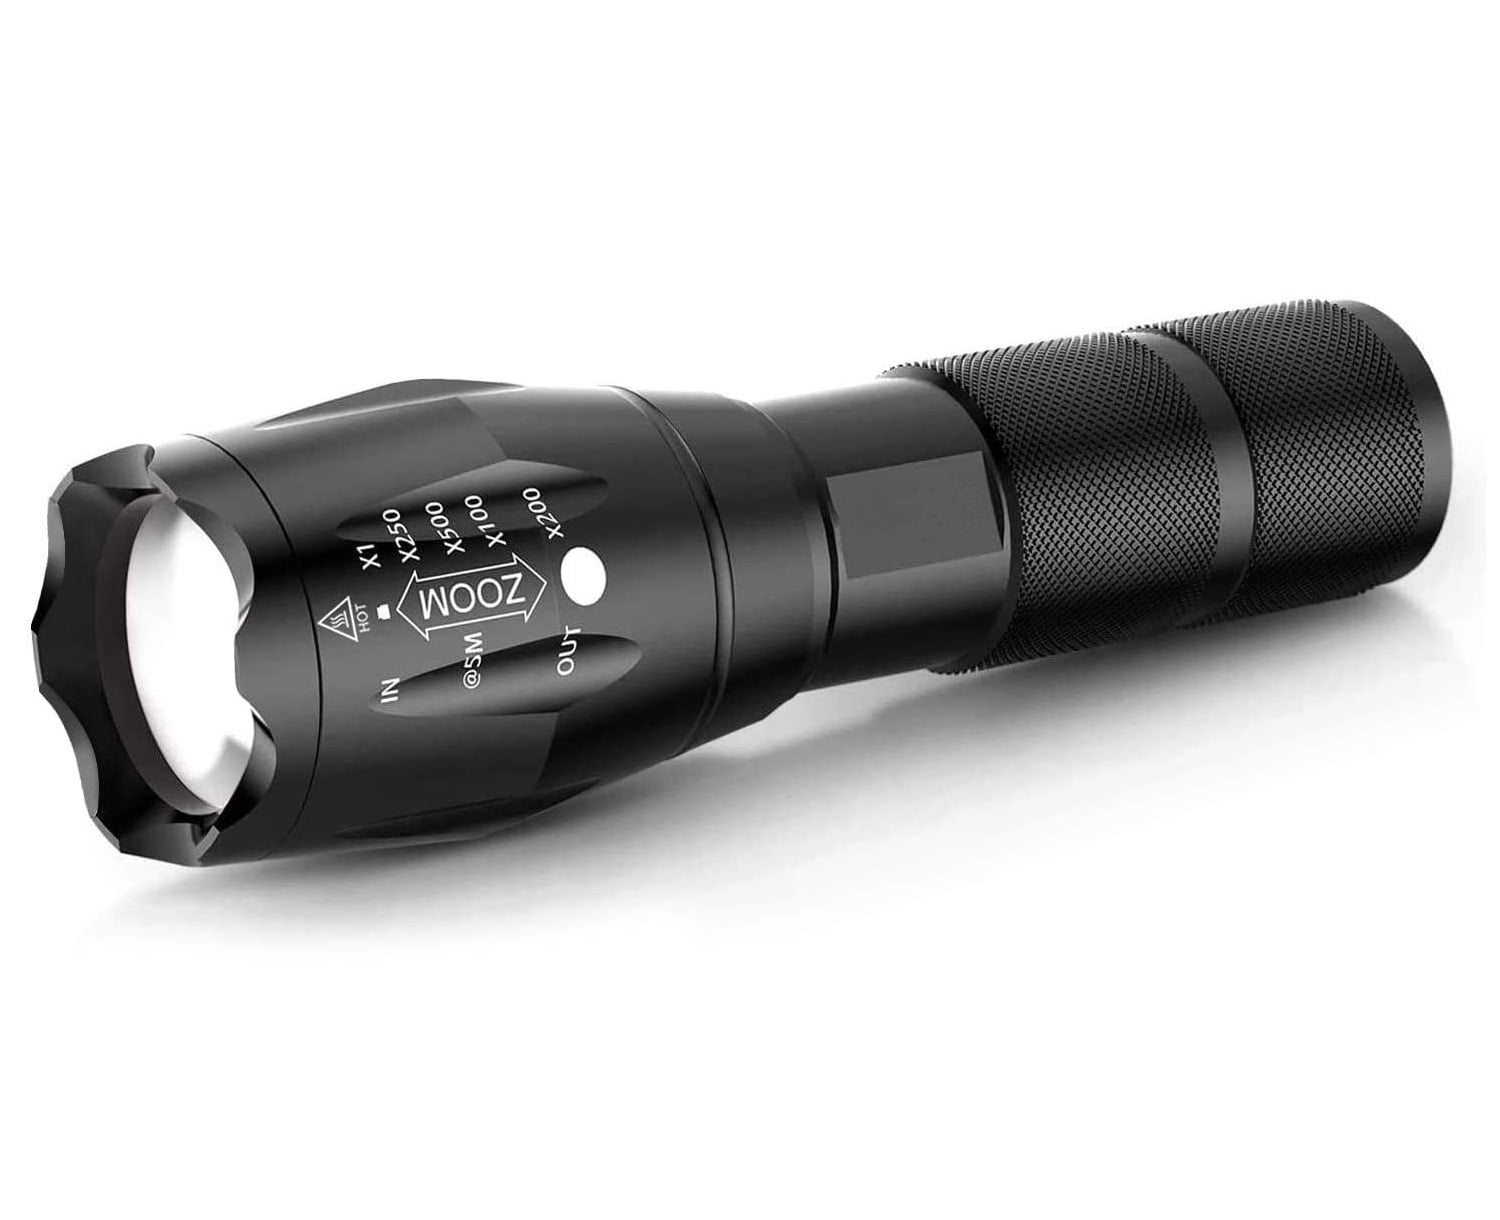 Powerful Police Tactical Zoomable T6 LED 5 Modes Flashlight Torch Powerful Light 